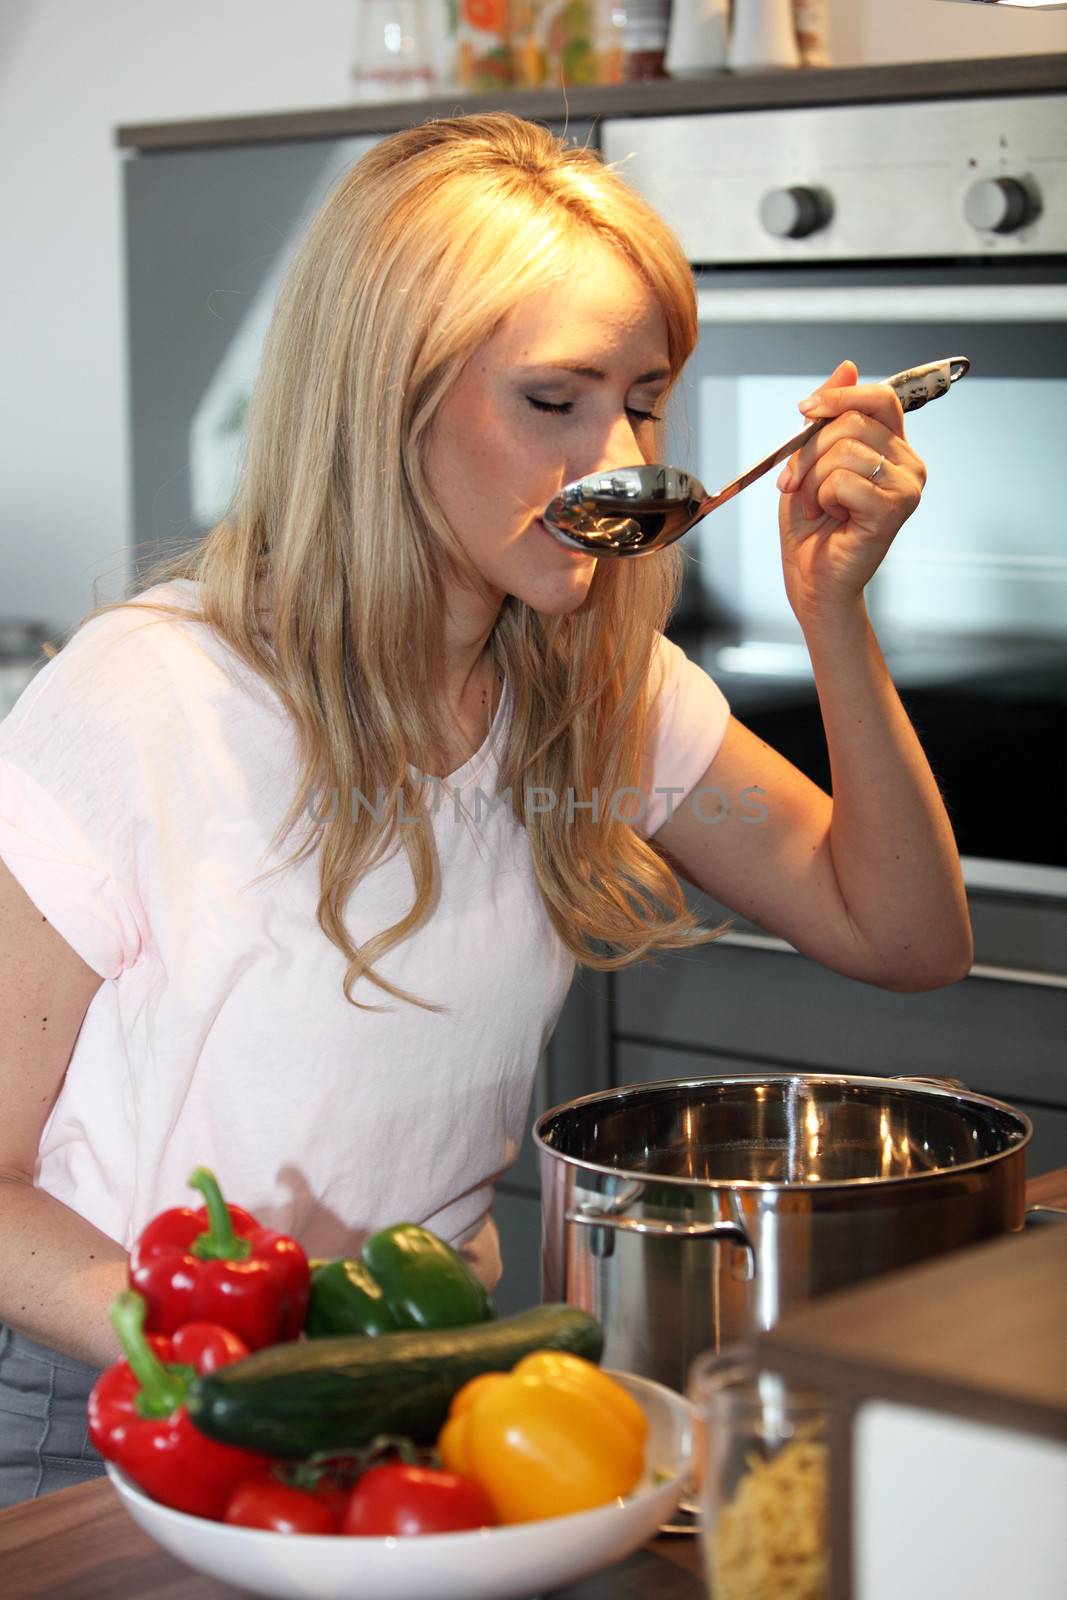 Pretty young blond woman standing over a saucepan on the stove tasting her cooking with a colourful bowl of fresh peppers in the foreground